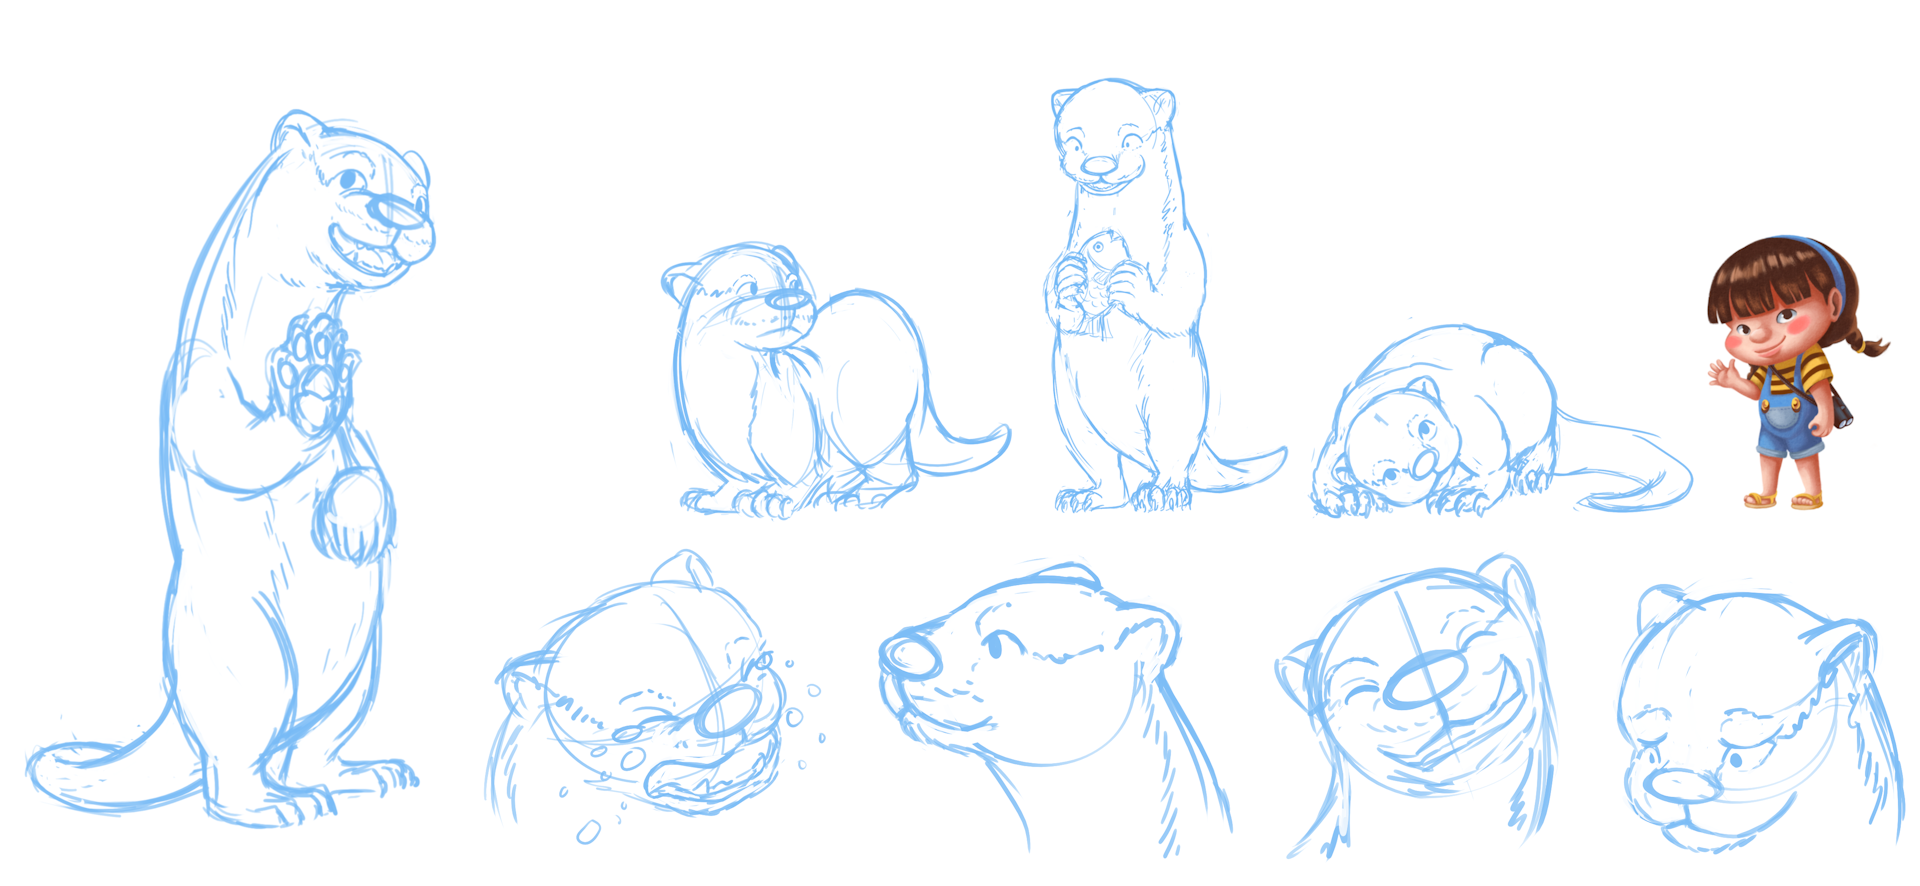 WIP sketches of Mr. Otter's character sheet.